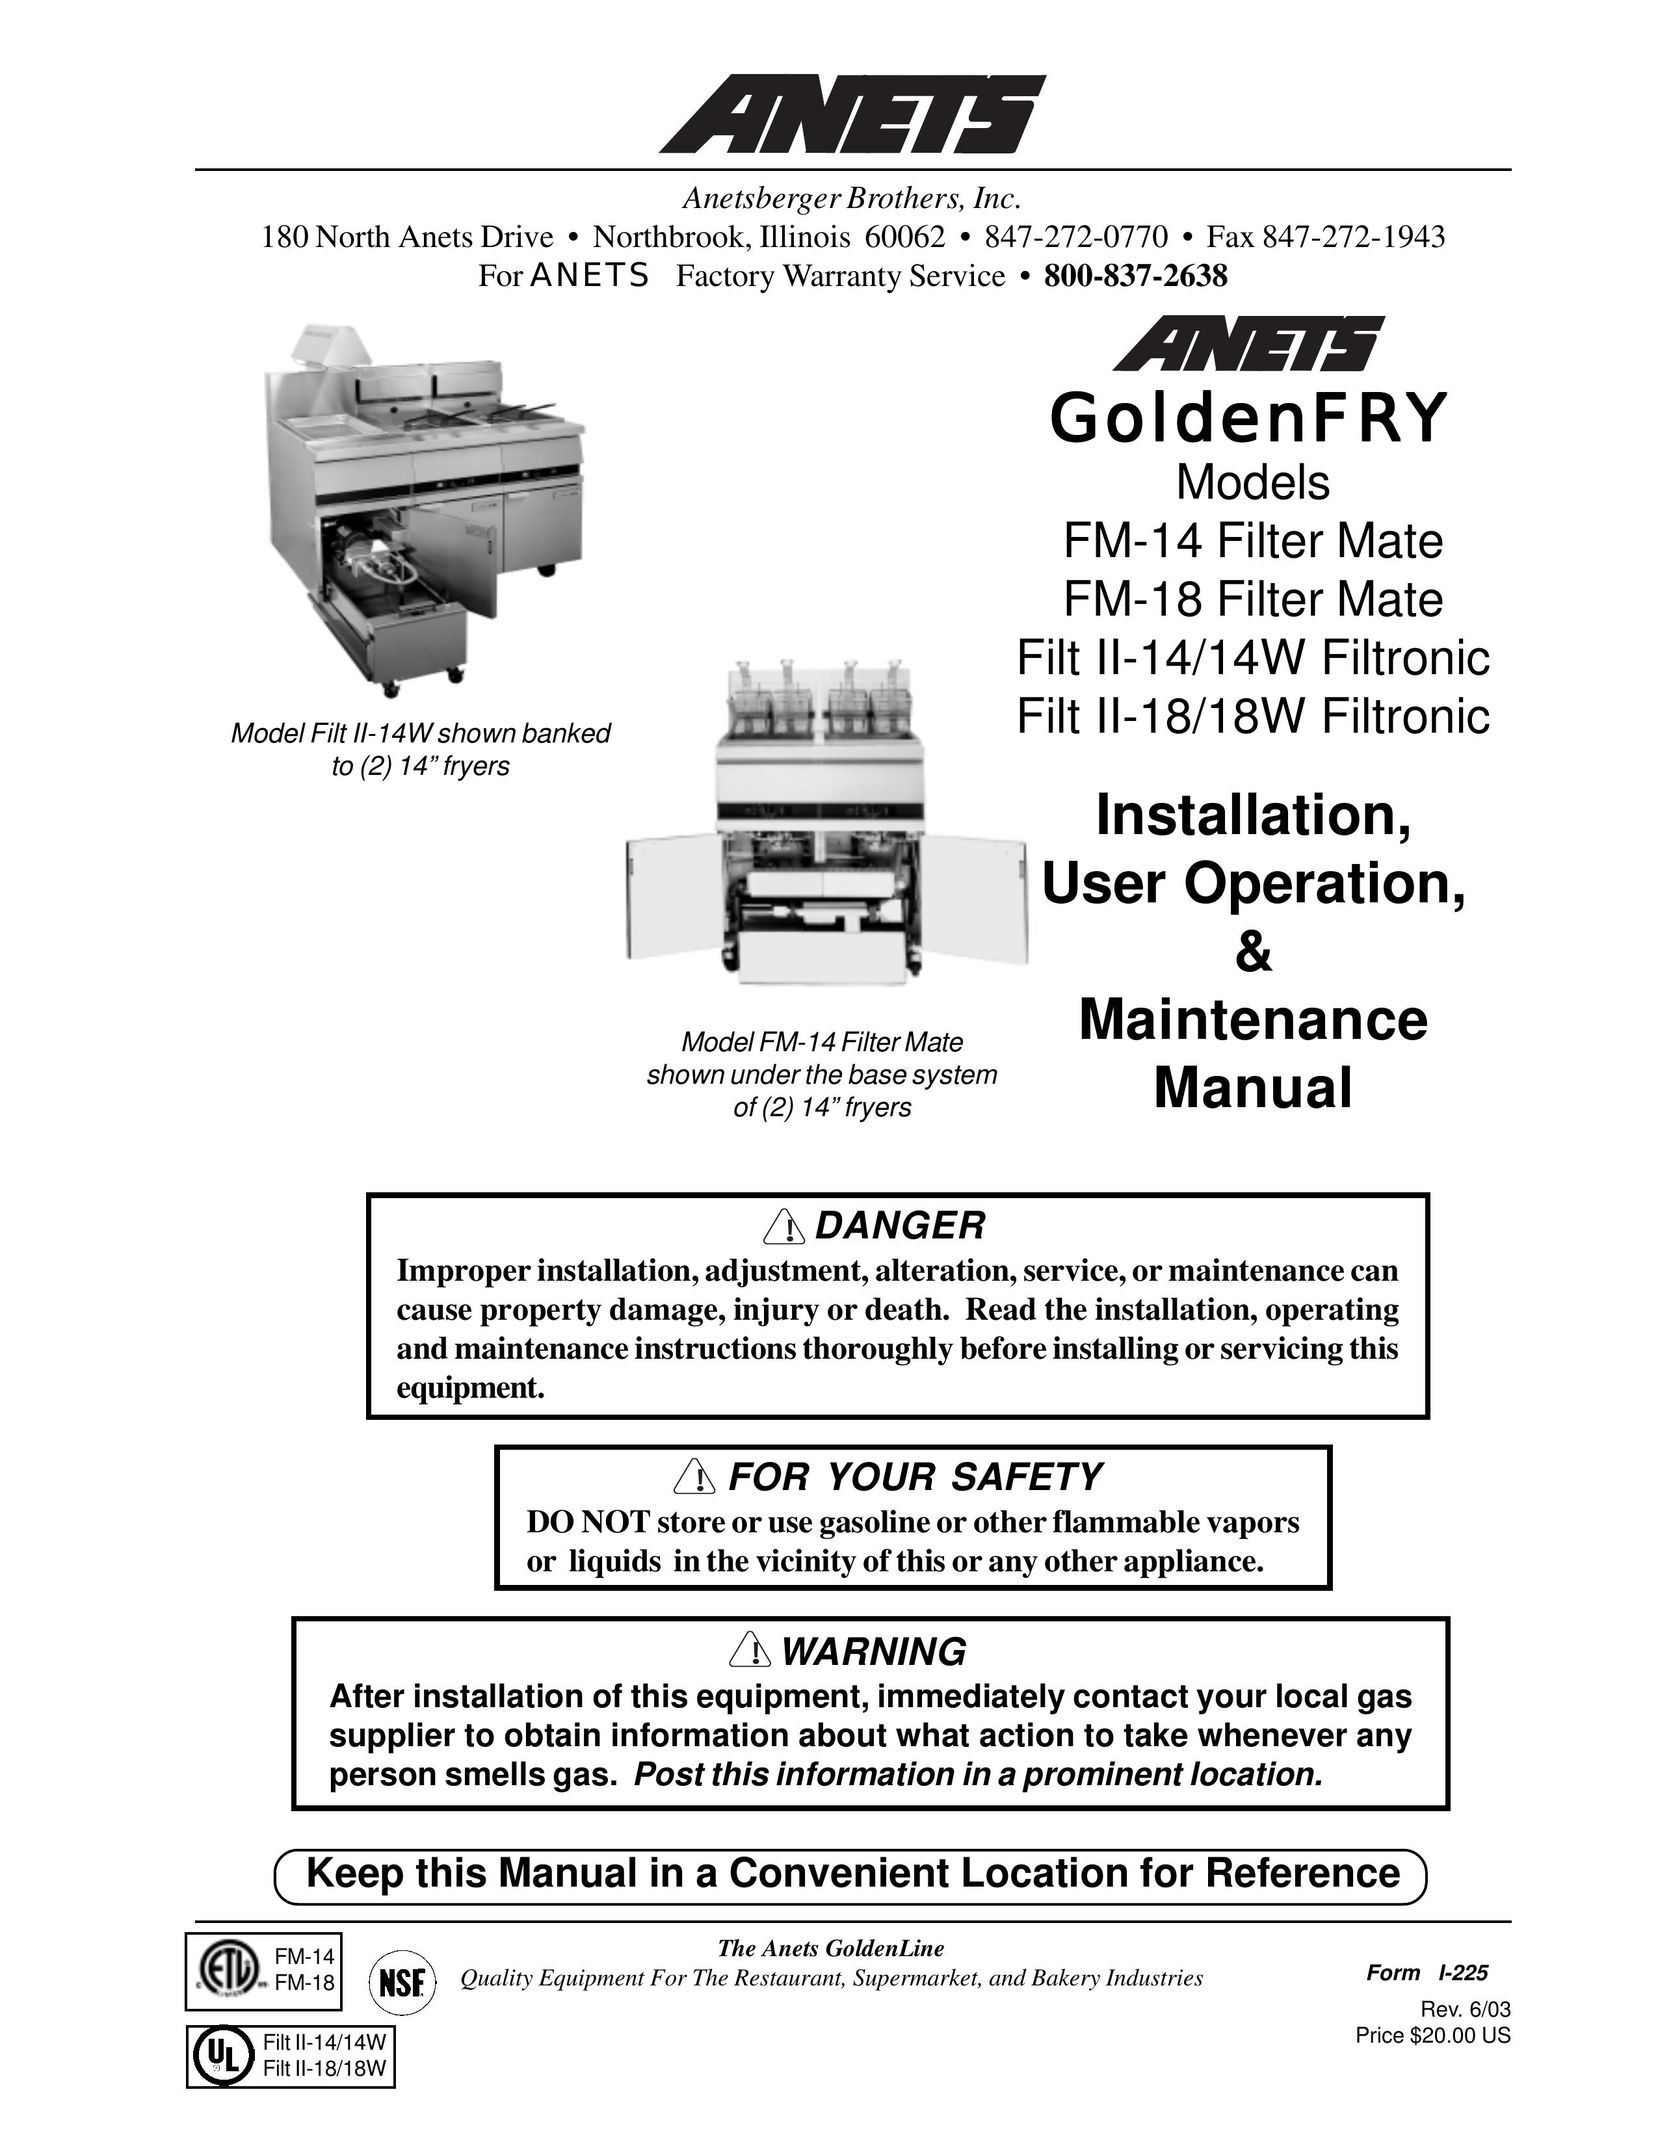 Anetsberger Brothers FM-14 Fryer User Manual